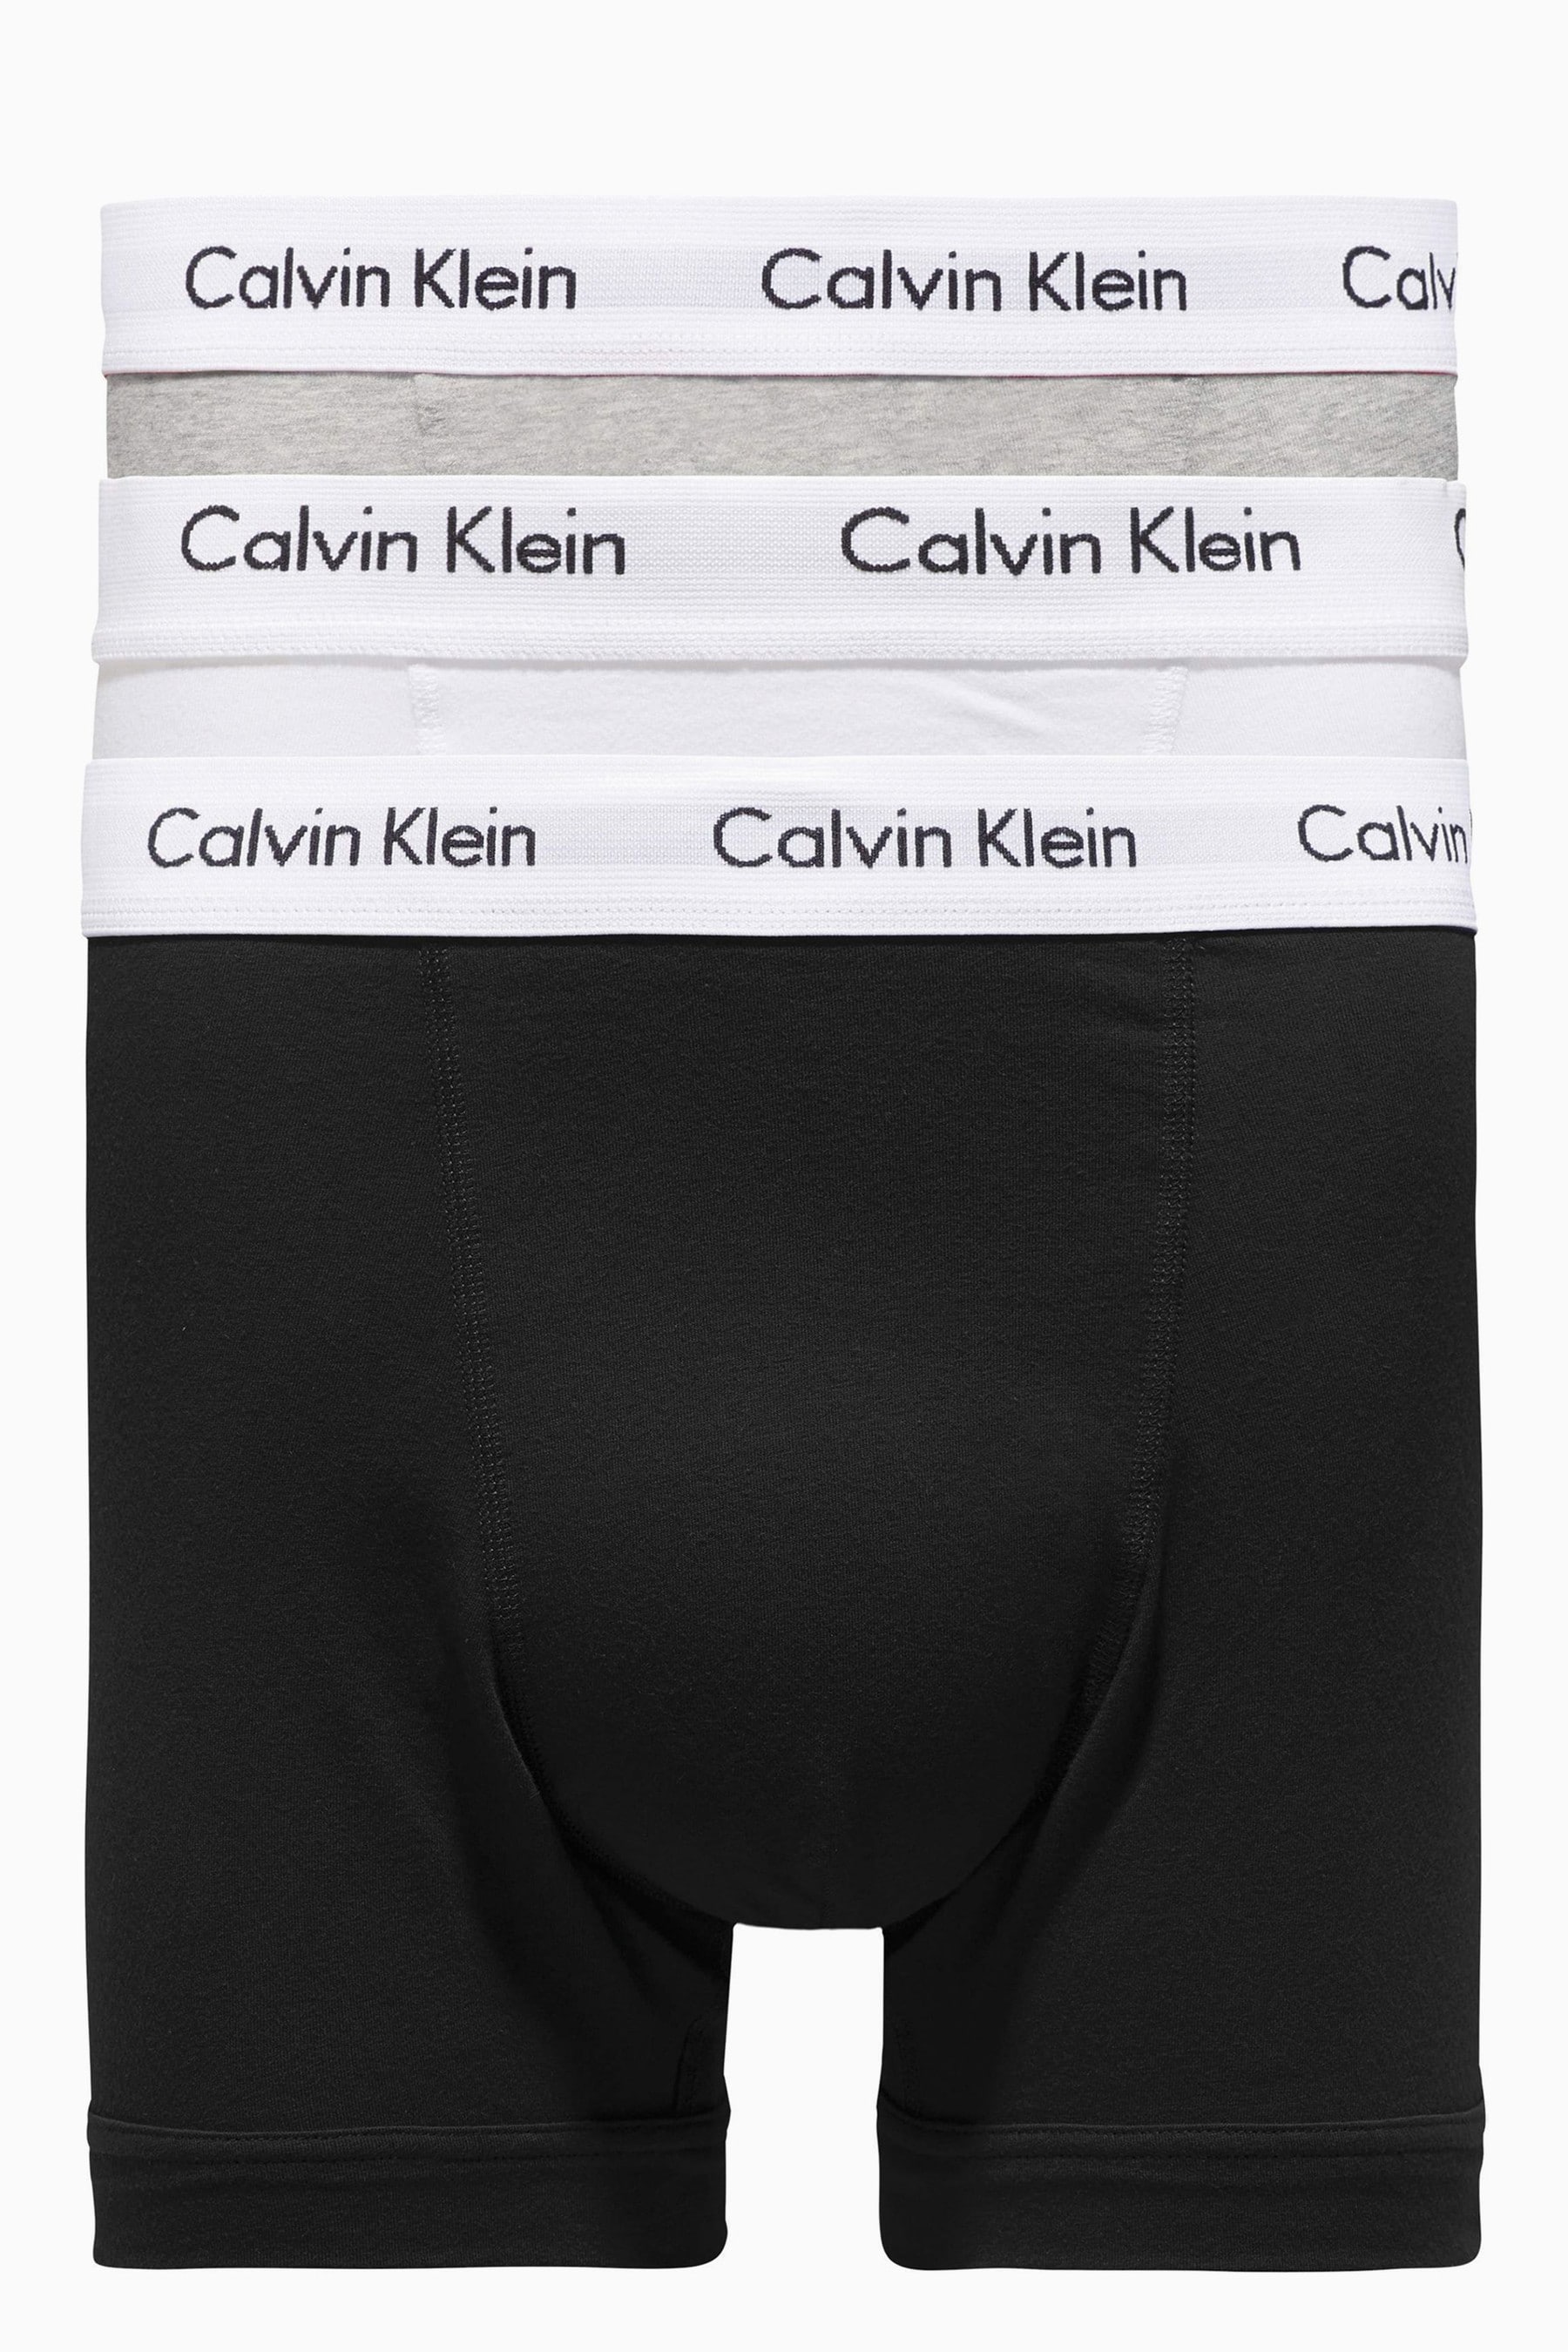 Buy Calvin Klein Trunks 3 Pack from the Next UK online shop